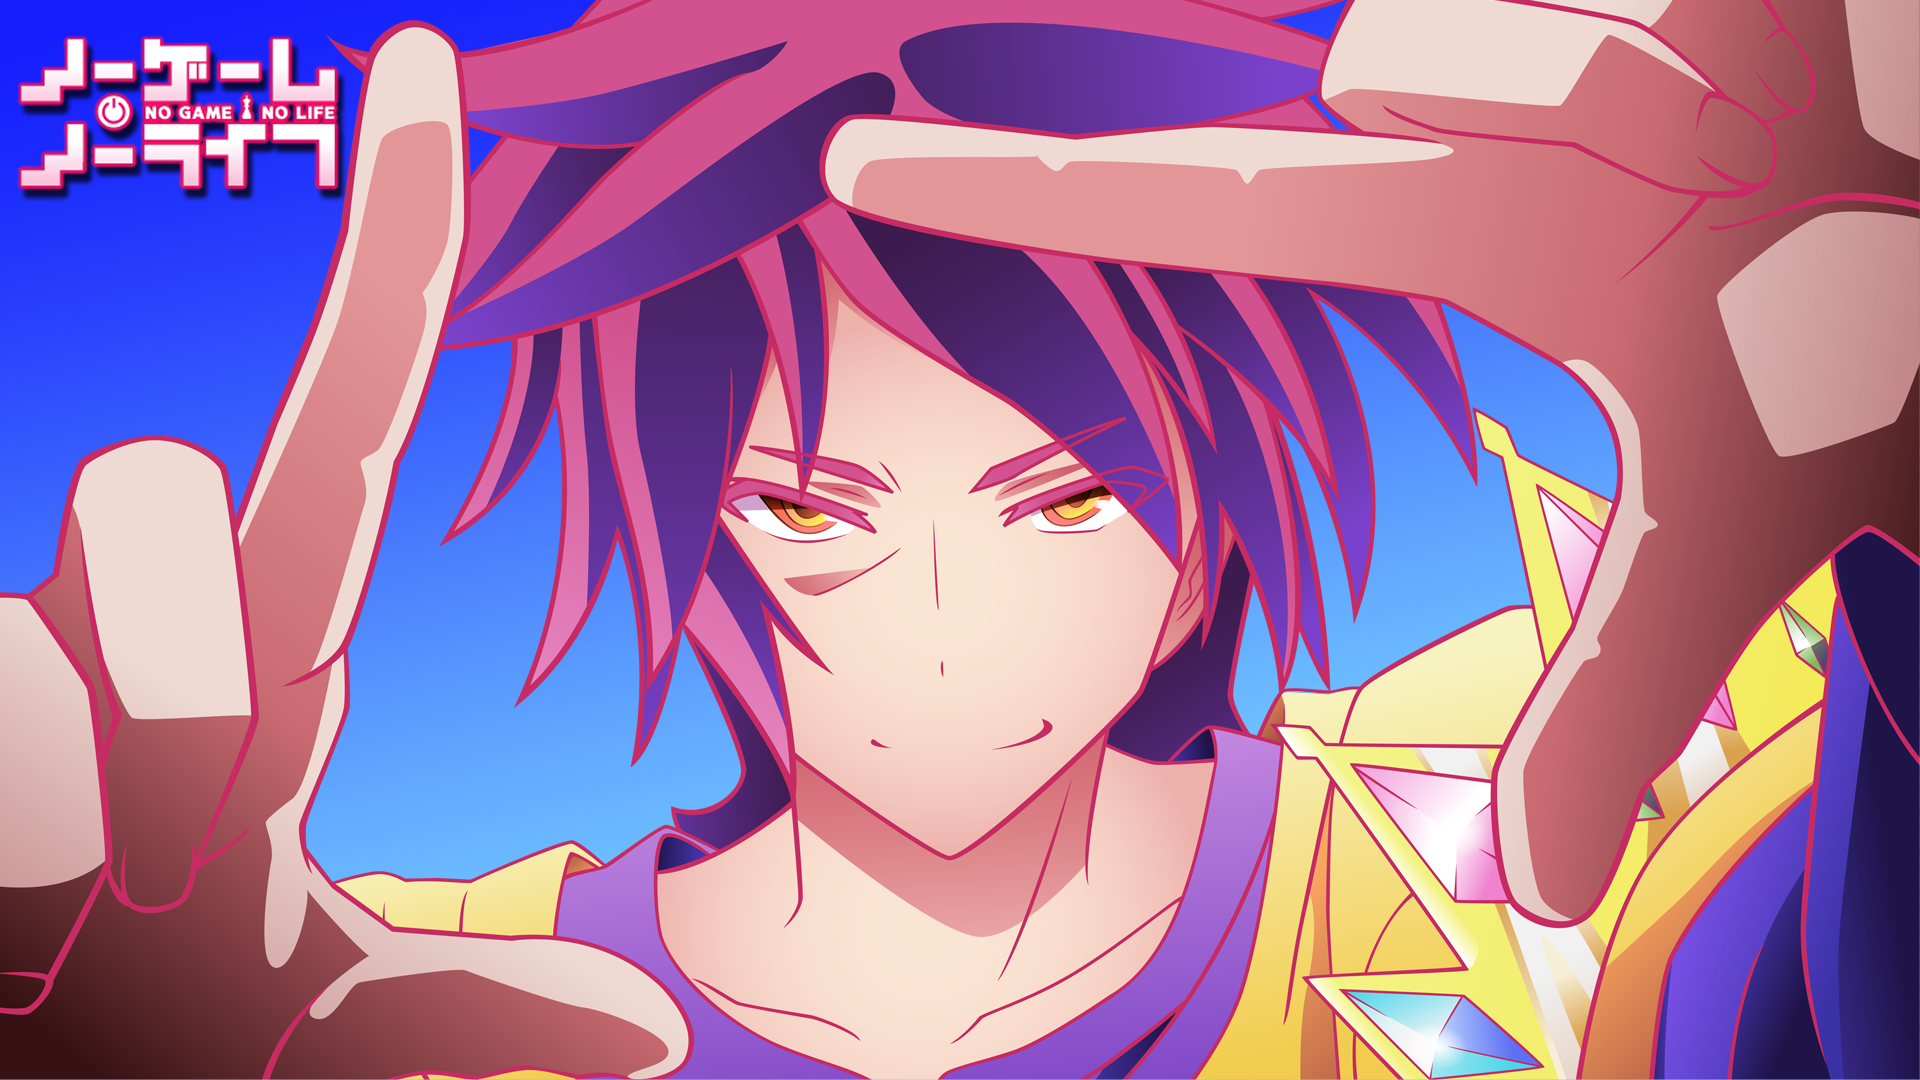 Anime 1920x1080 anime boys anime colorful No Game No Life face yellow eyes glowing eyes hand gesture hands pink hair looking at viewer